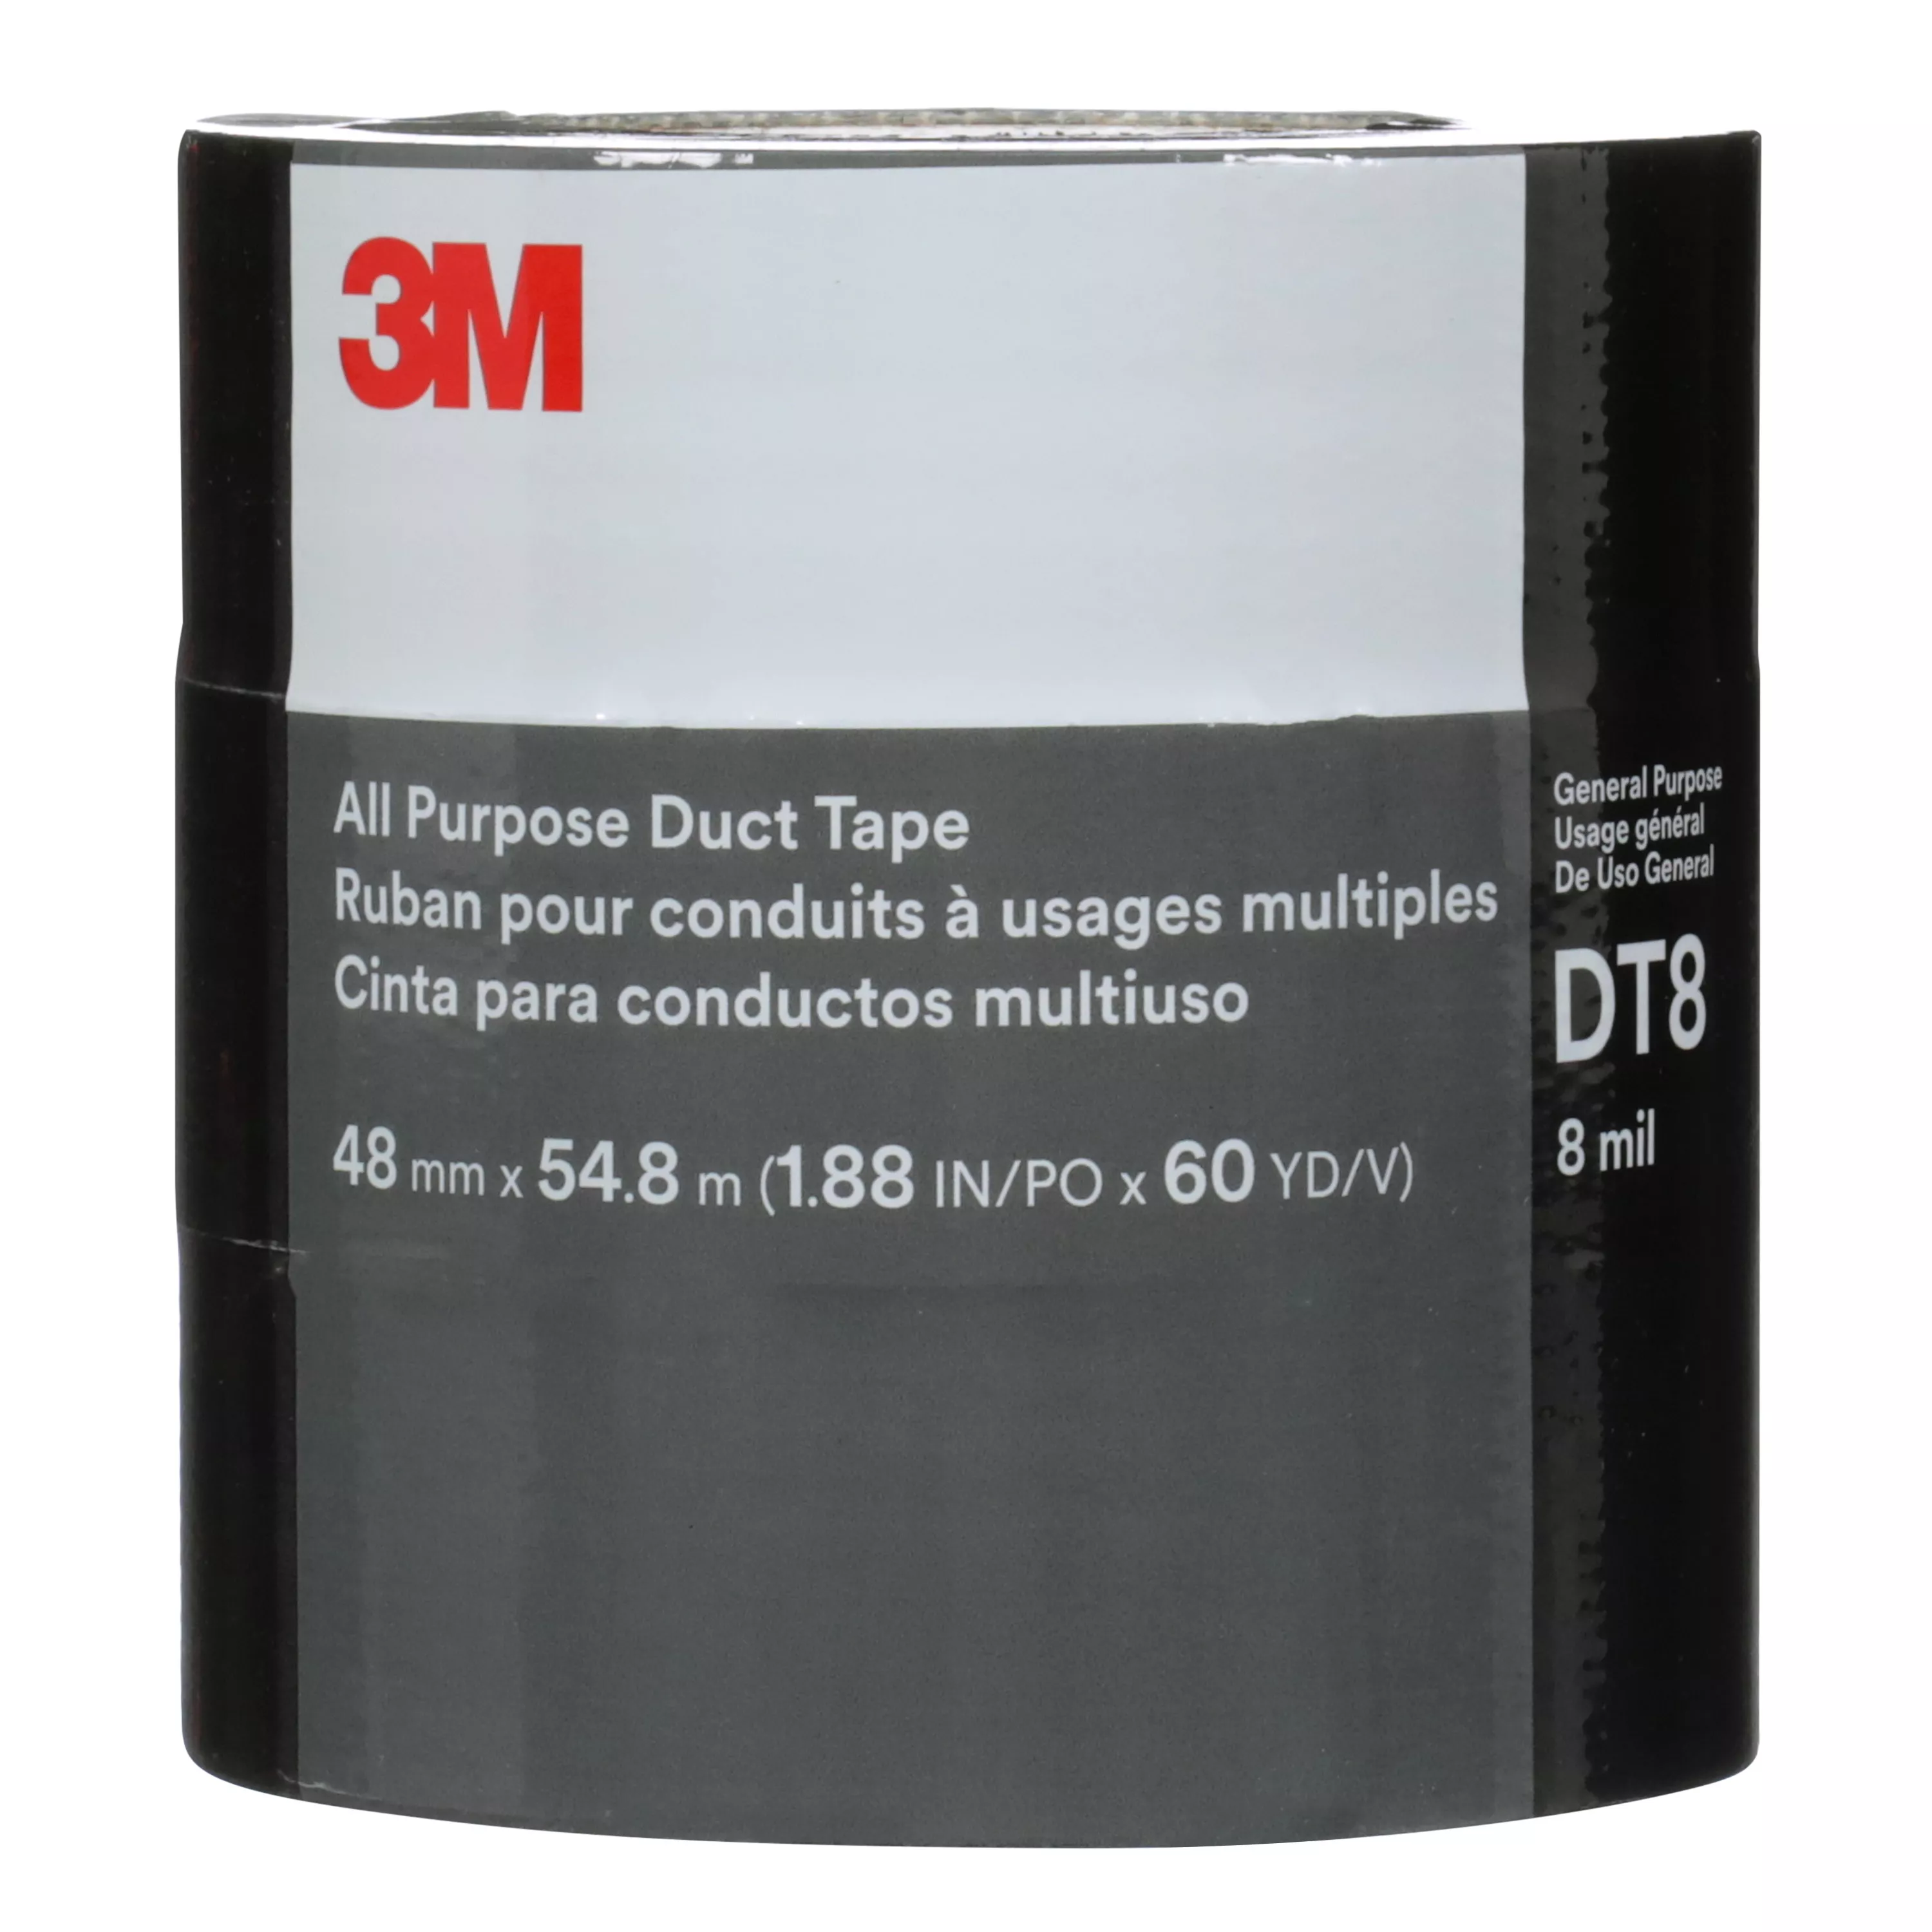 SKU 7100253082 | 3M™ All Purpose Duct Tape DT8